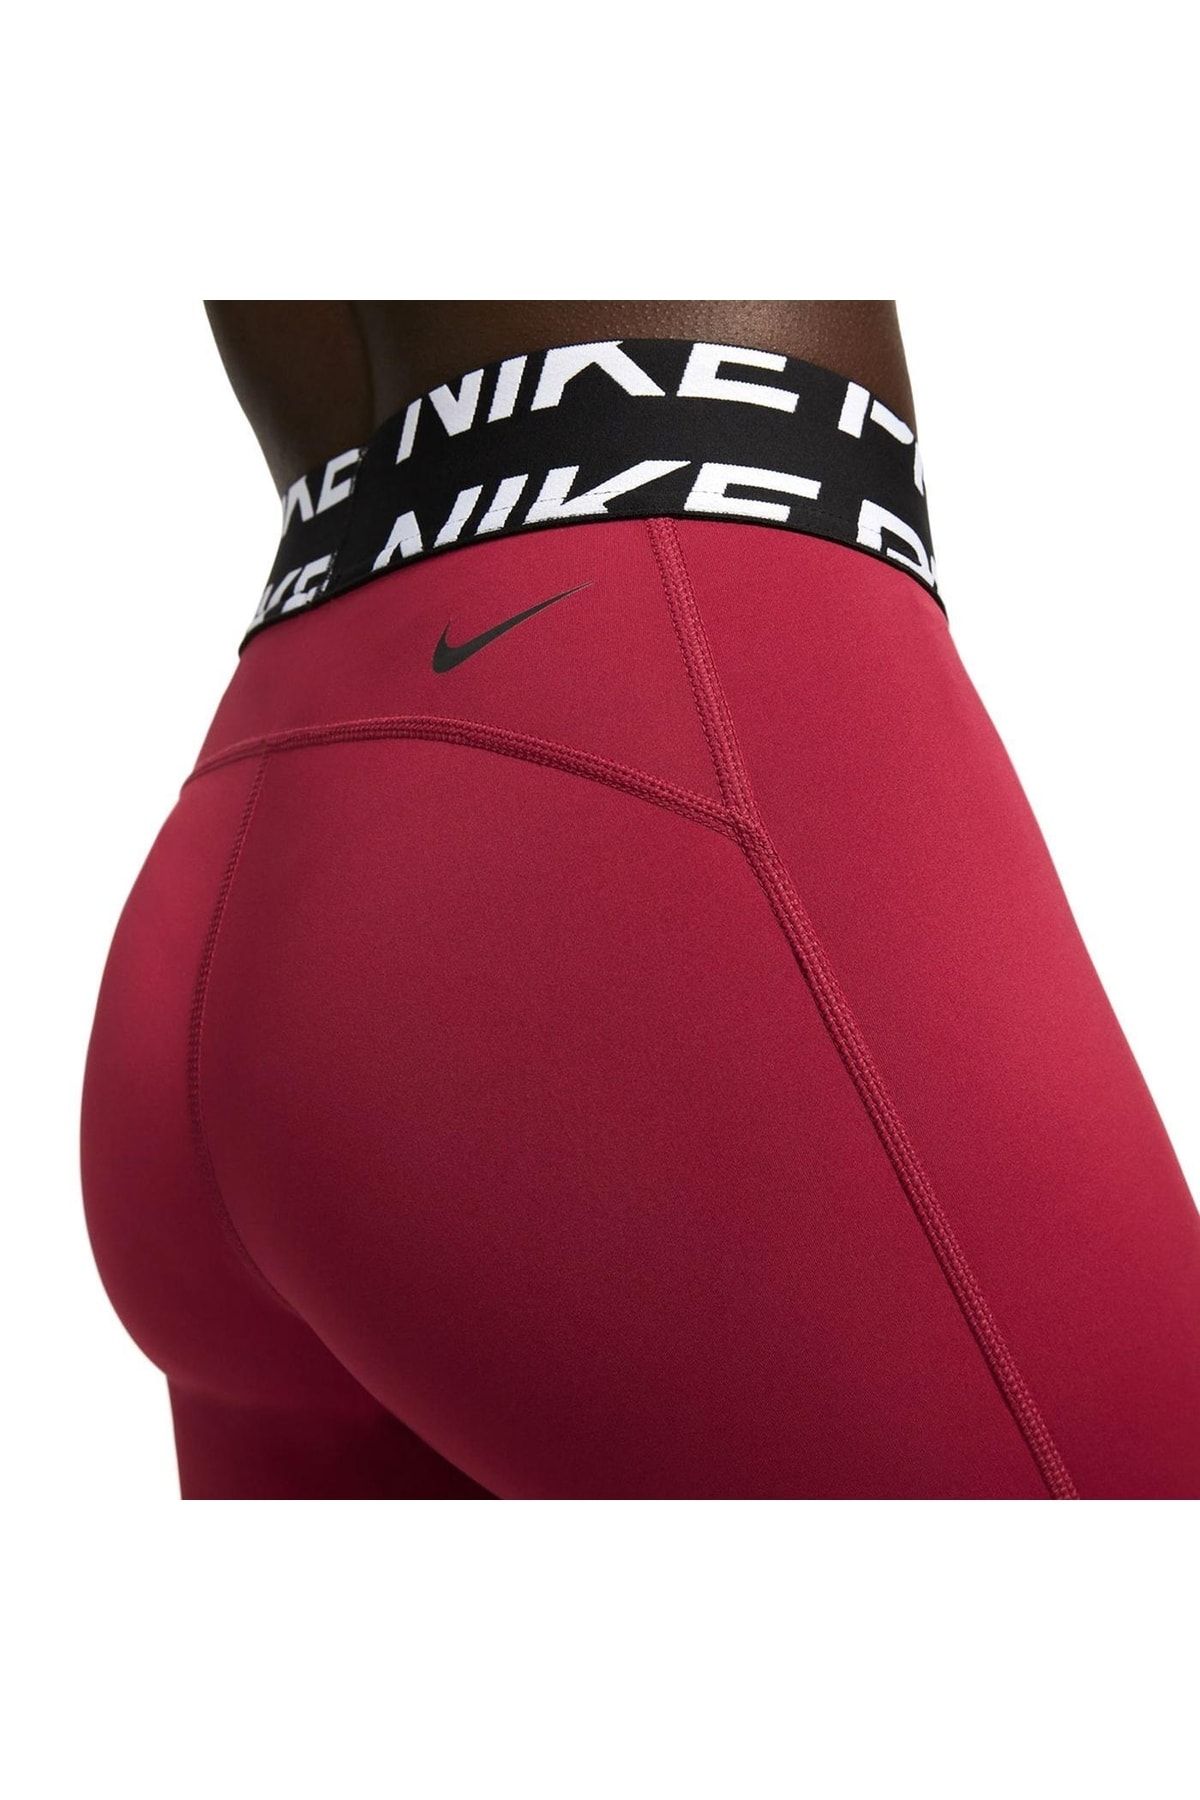 NIKE PRO DRI FIT GRAPHIC TRAINING GYM TIGHTS TANK SET OUTFIT DR7741-693  WOMEN XS